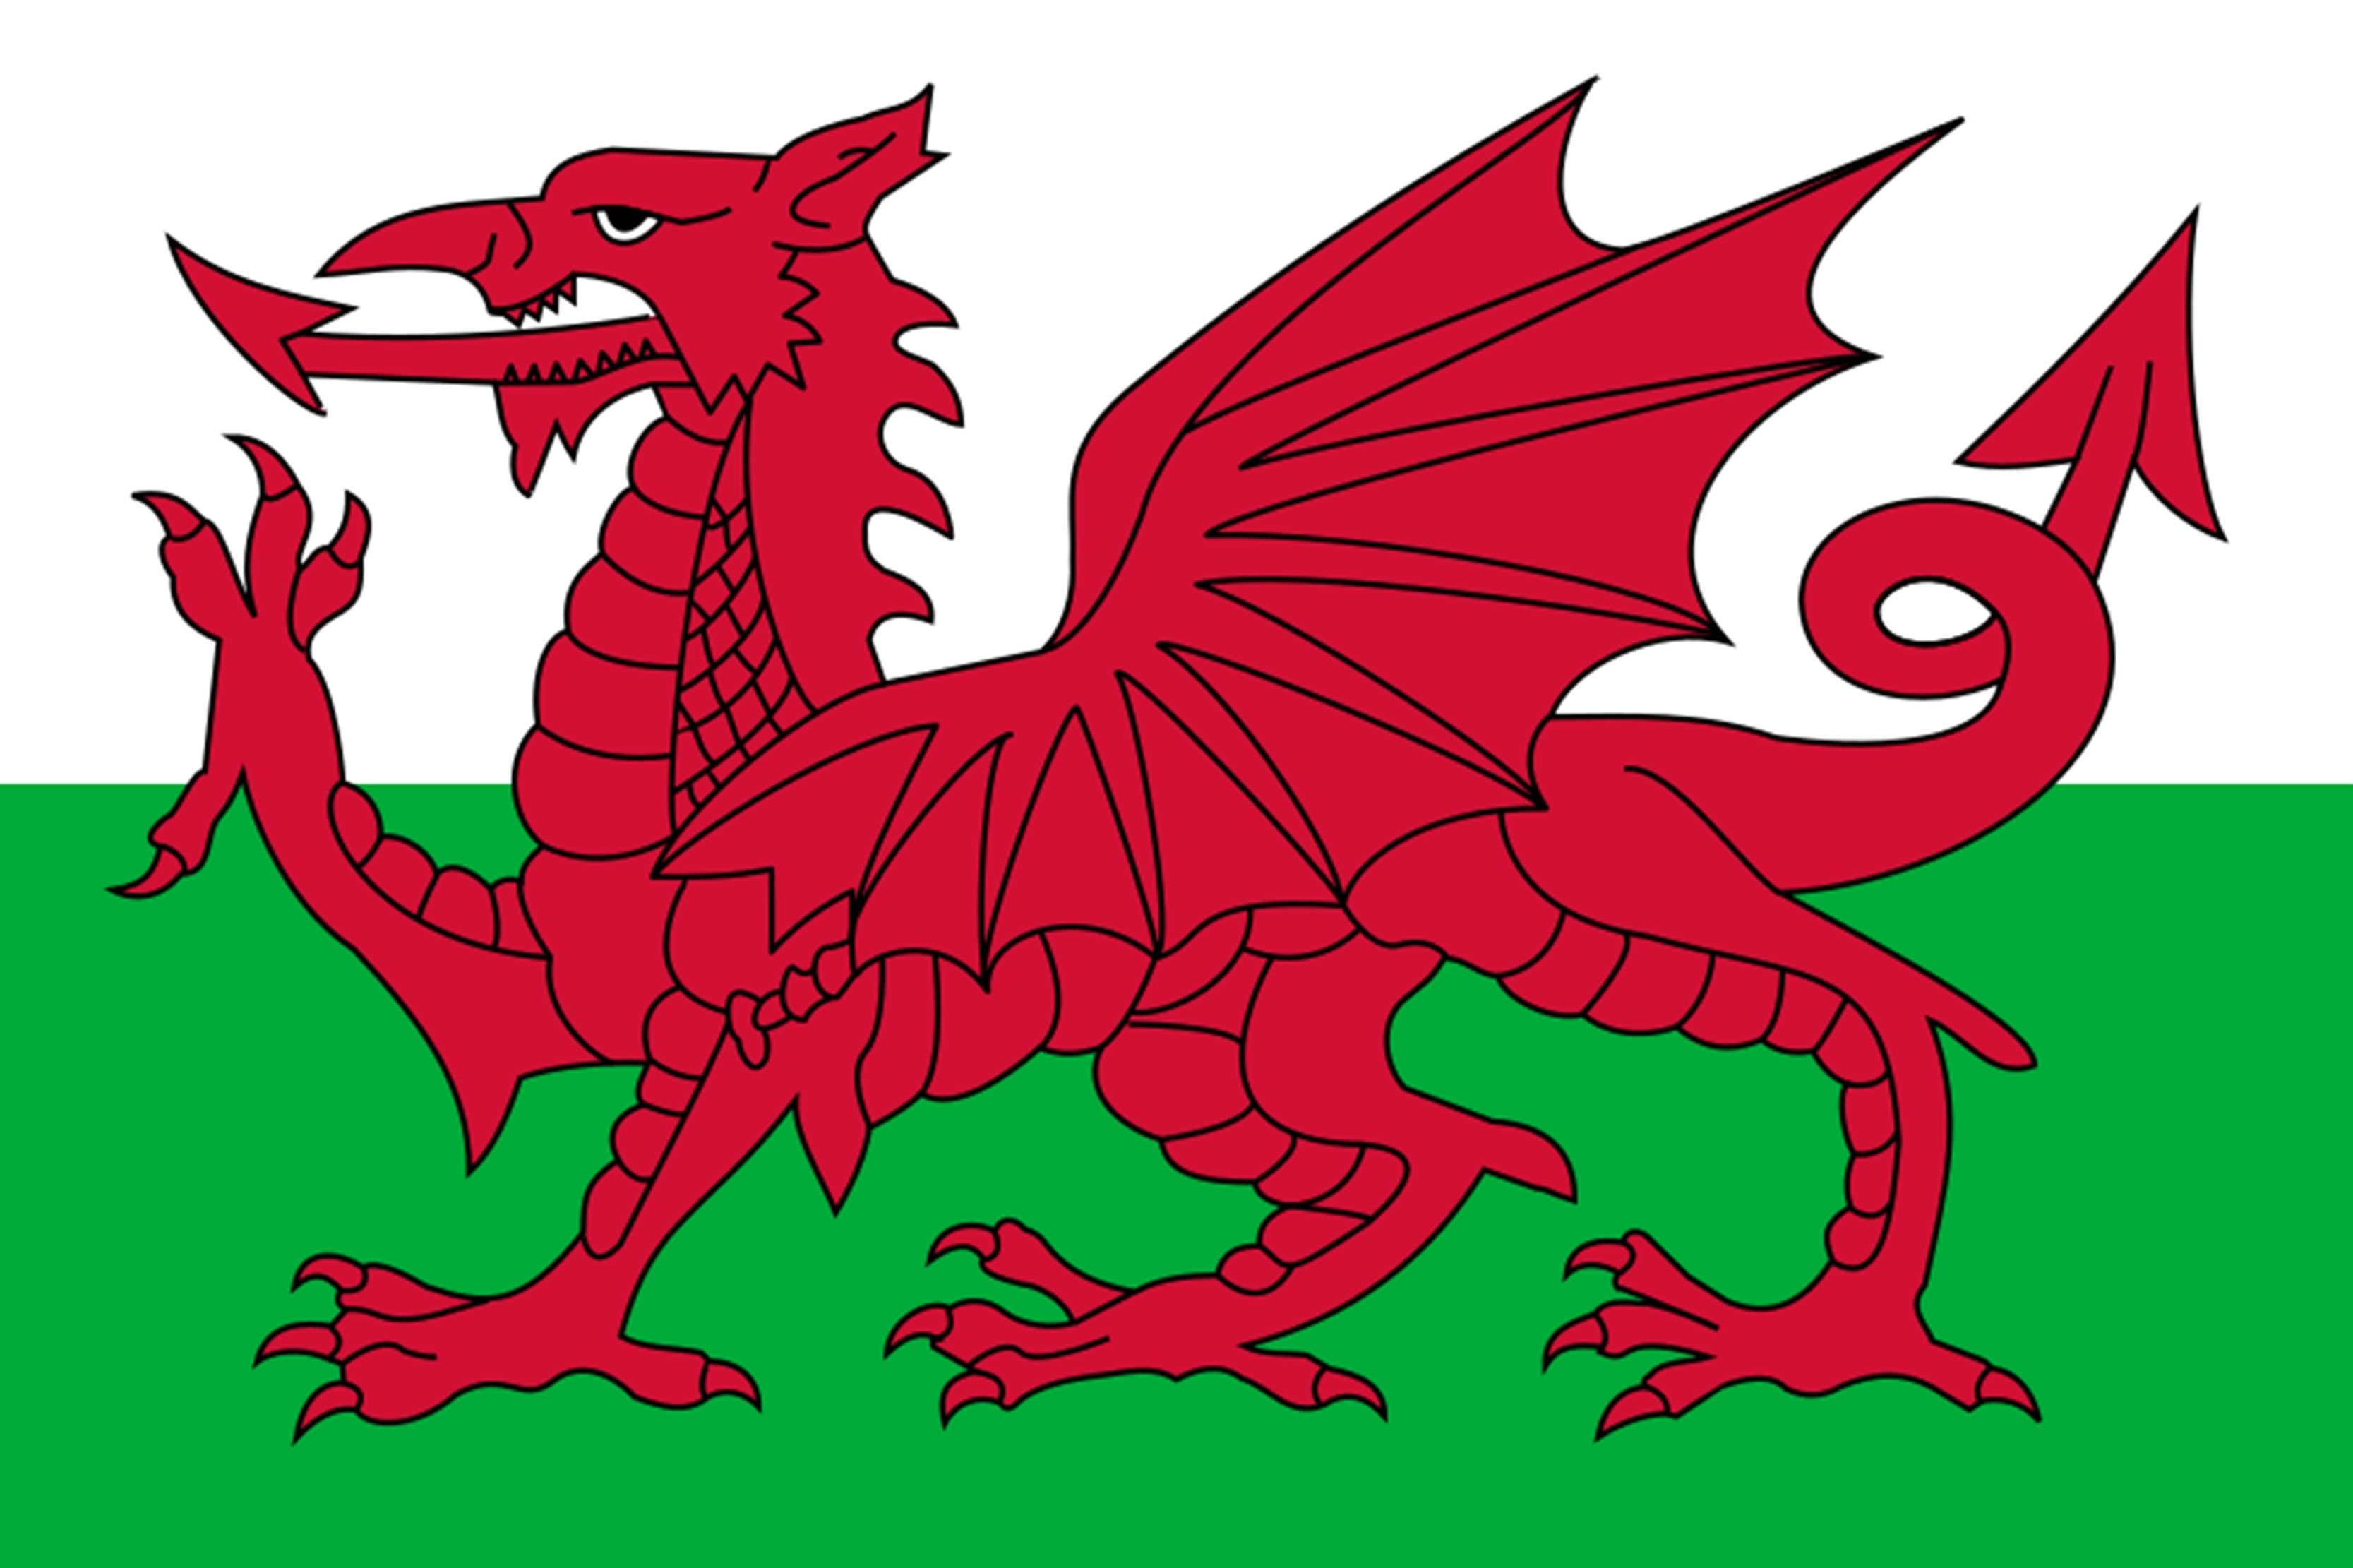 Wales Red Dragon Flag